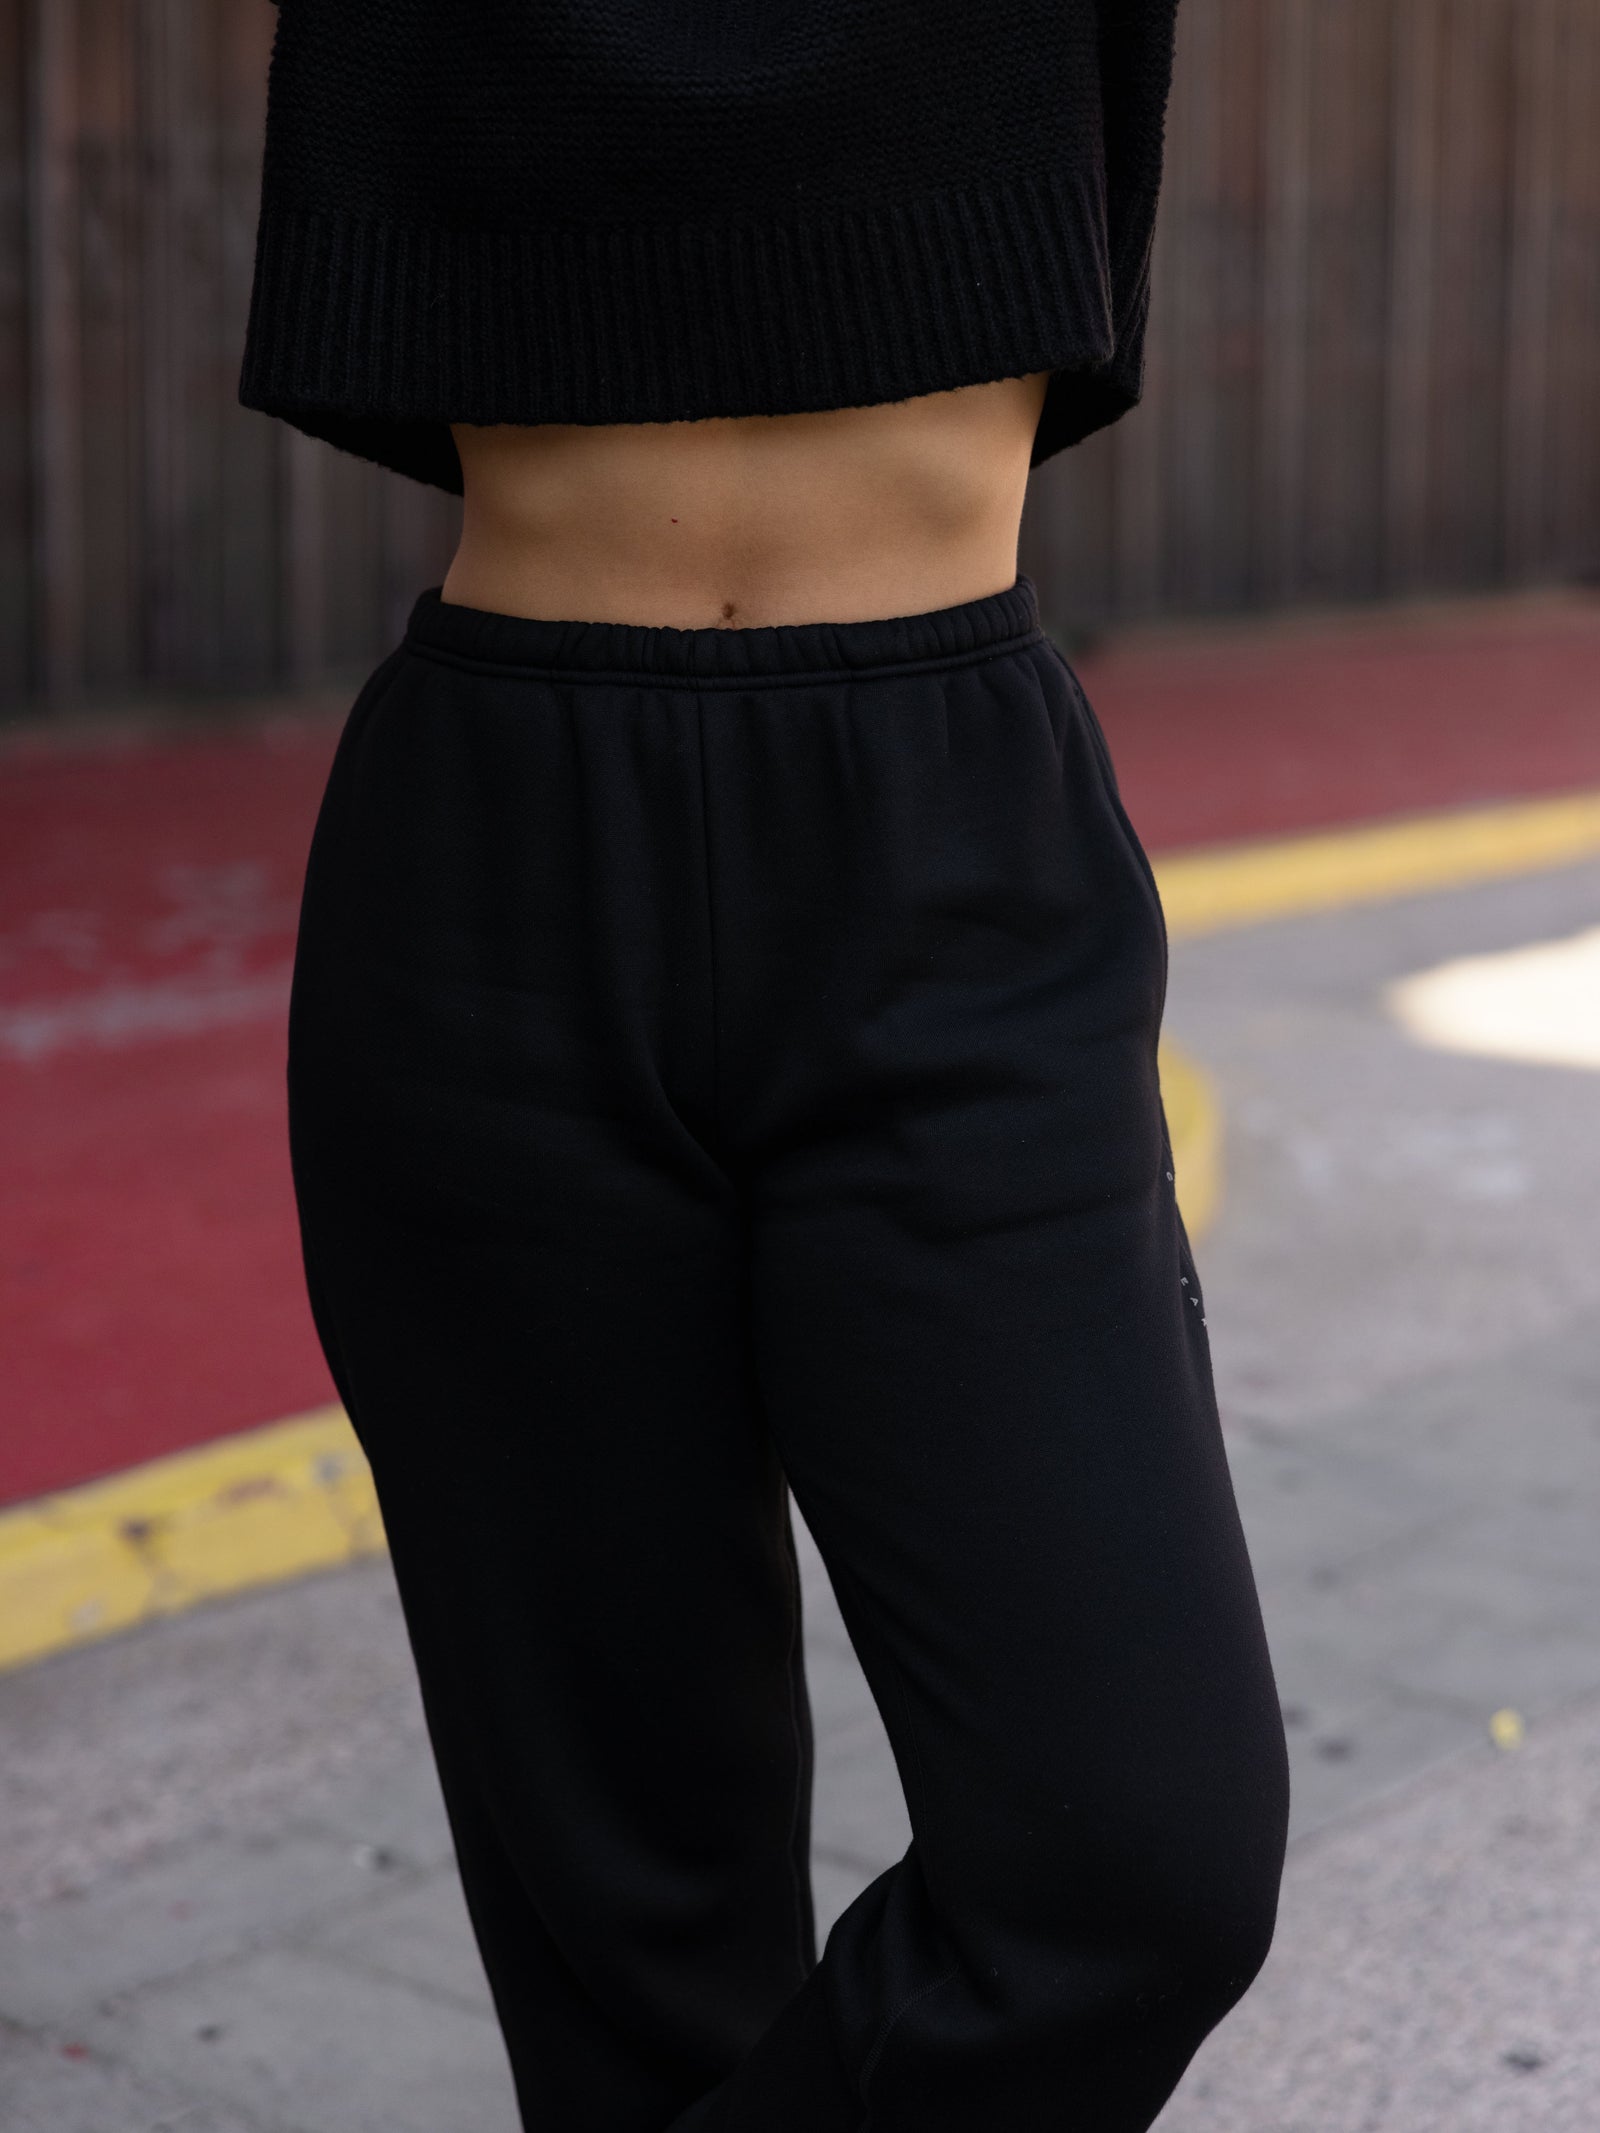 Black CityScape Joggers. The Joggers are being worn by a female model. The photo is taken from the waist down. The back ground is white. 